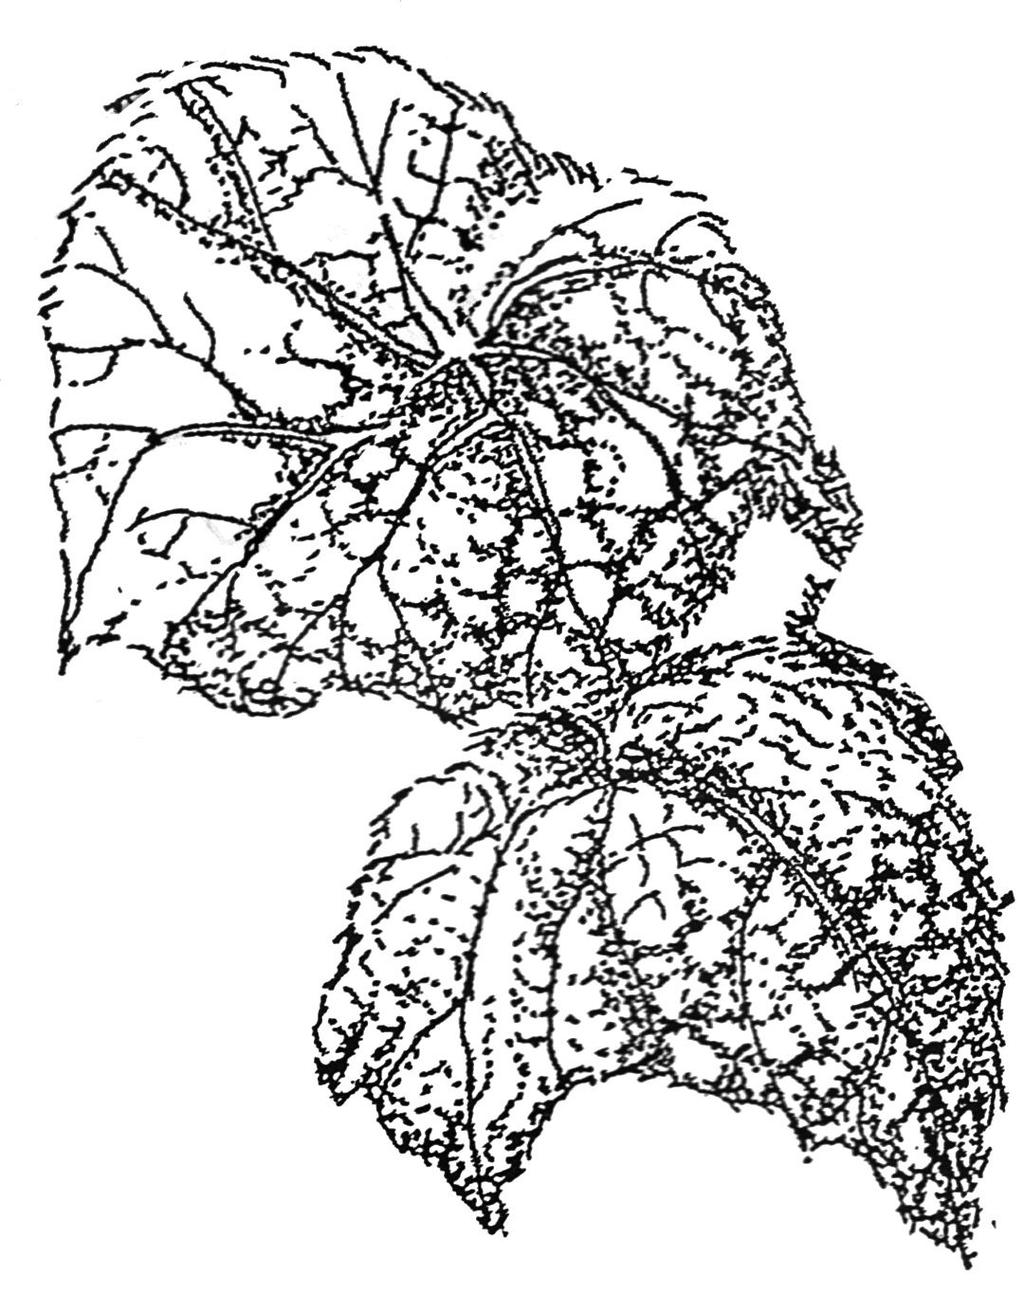 It is named in honor of Carrie Karegeannes, who was then serving as nomenclature director of the American Begonia Society. This rhizomatous begonia sends out lateral rhizomes freely.